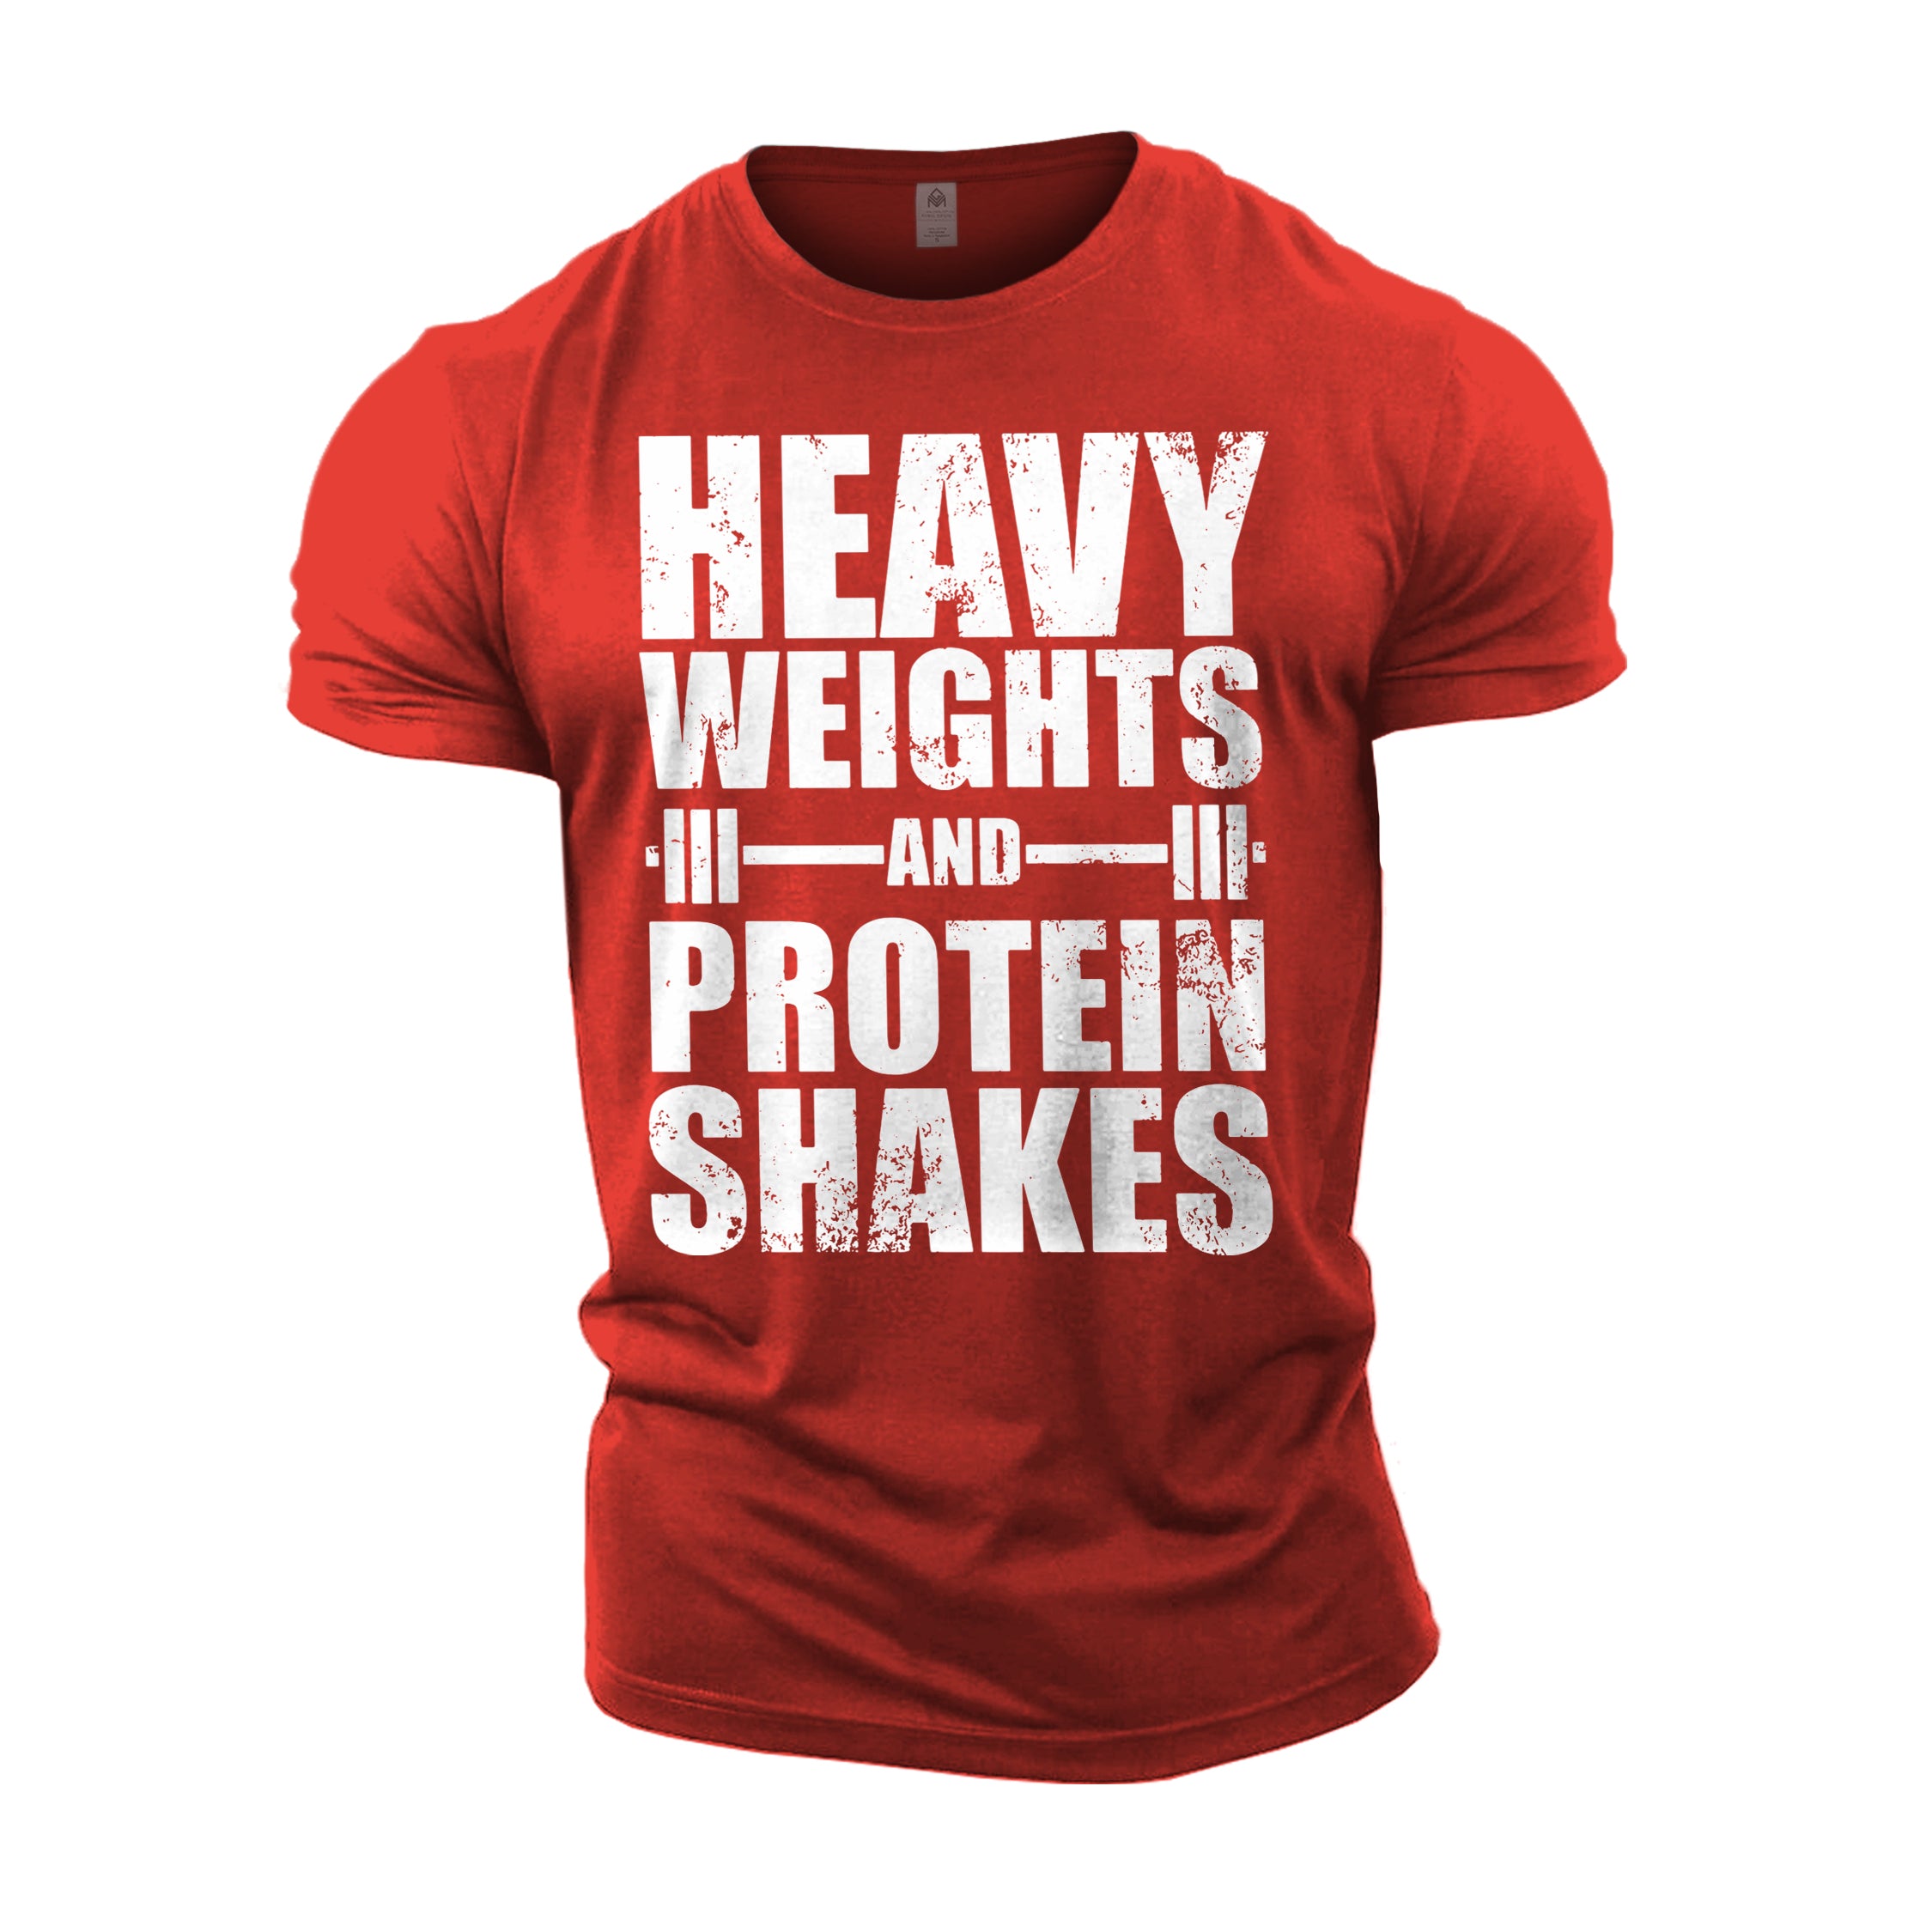 Heavy Weights and Protein Shakes - Gym T-Shirt